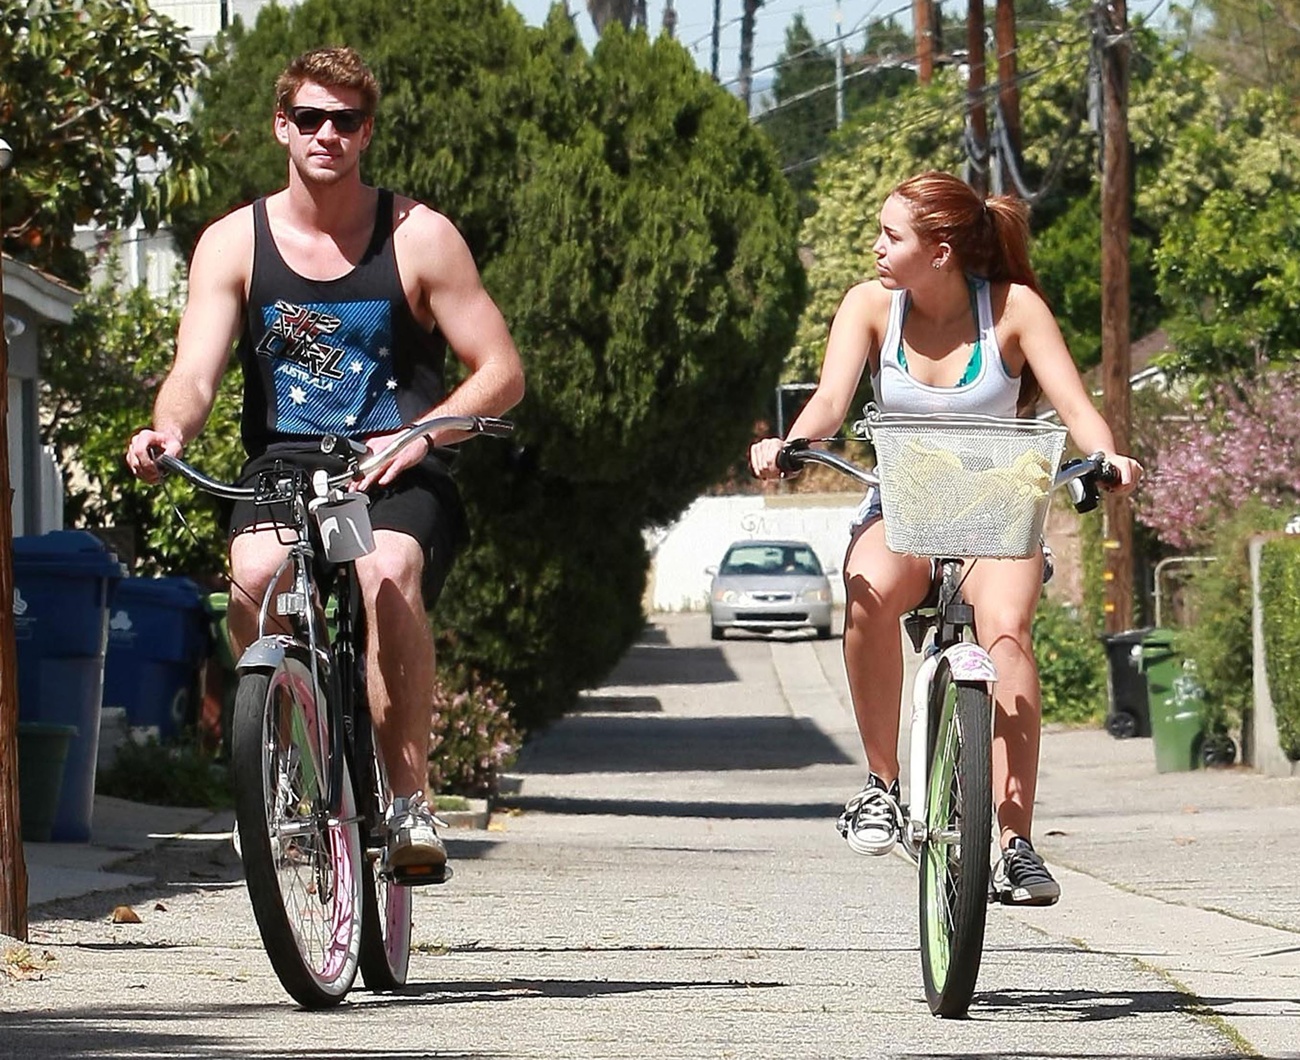 Miley and Liam riding their bikes in Toluca, Mexico